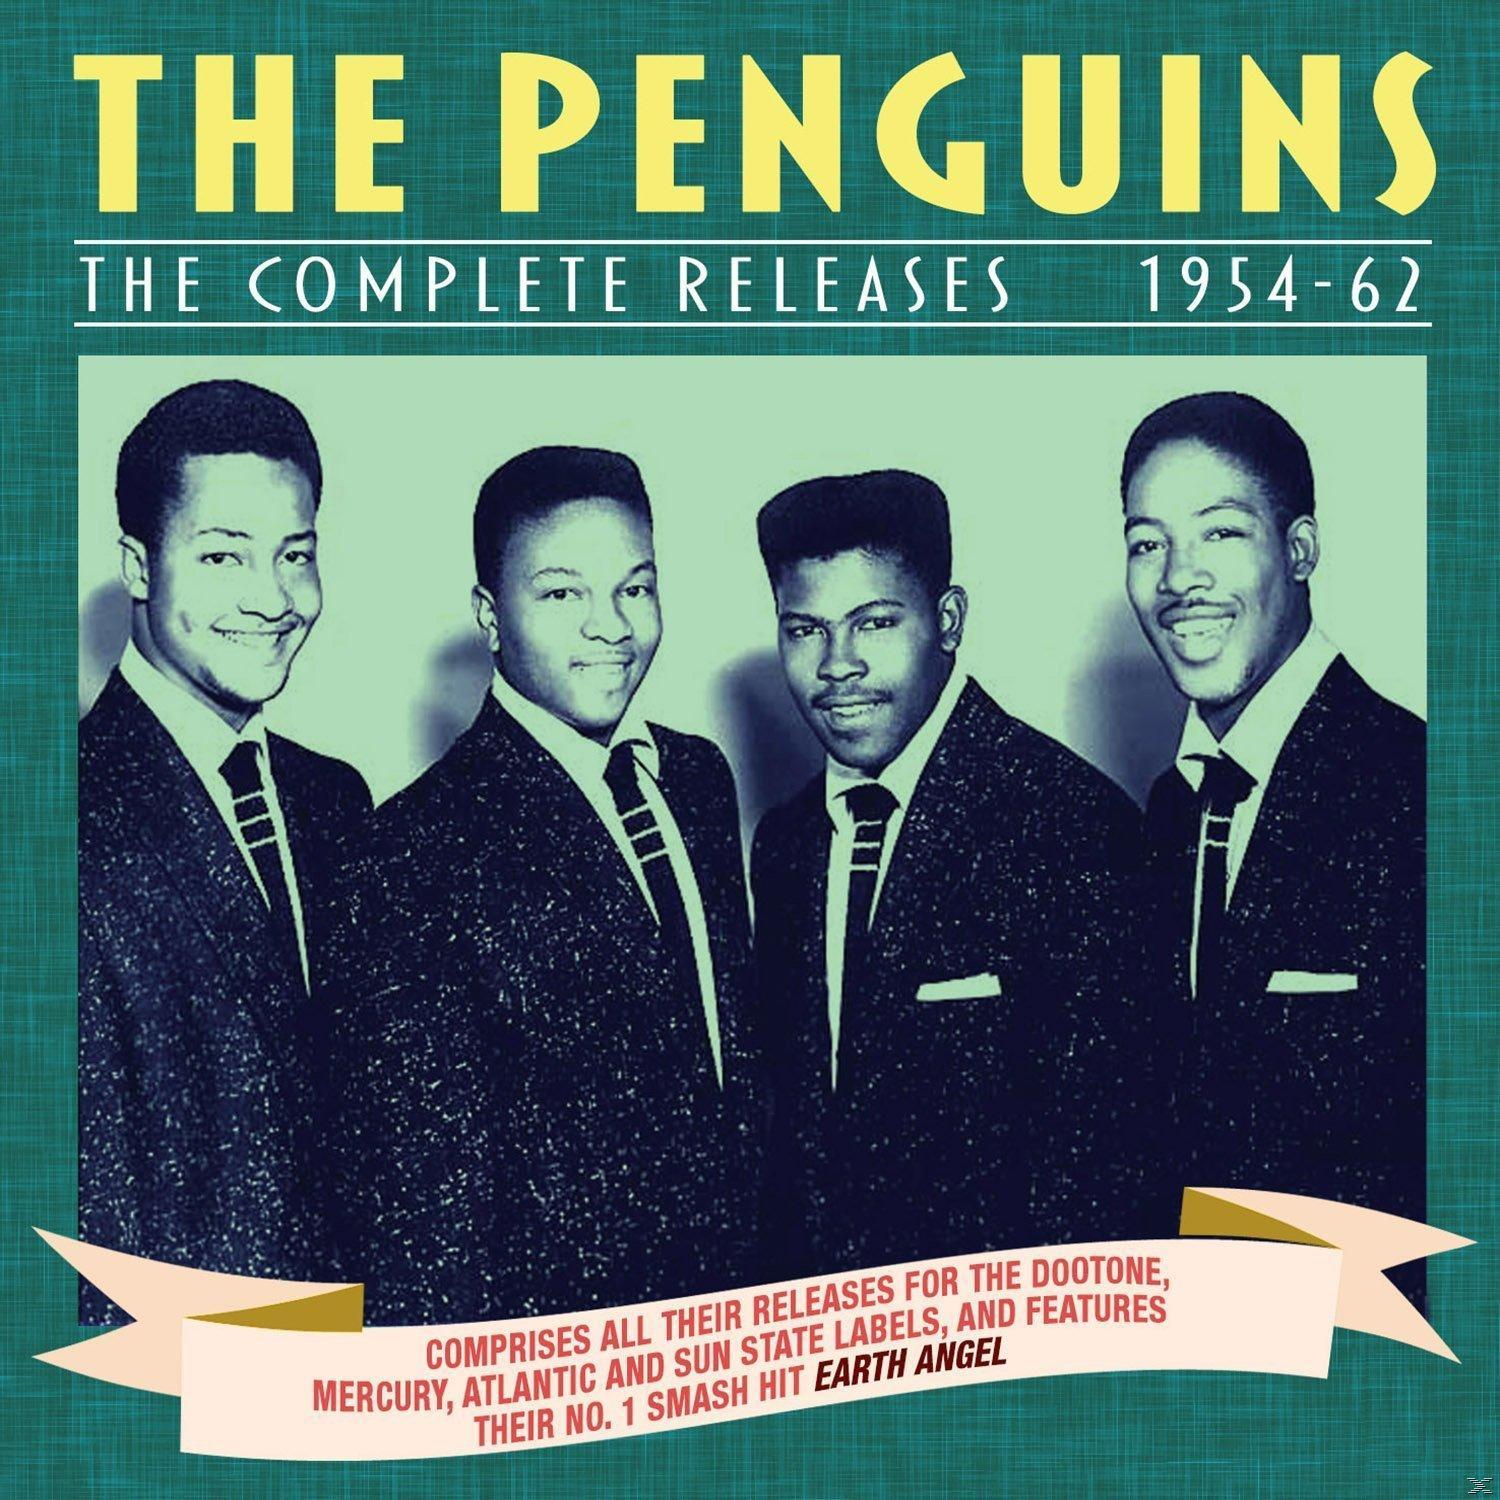 - Complete The (CD) Releases - The Penguins 1954-62